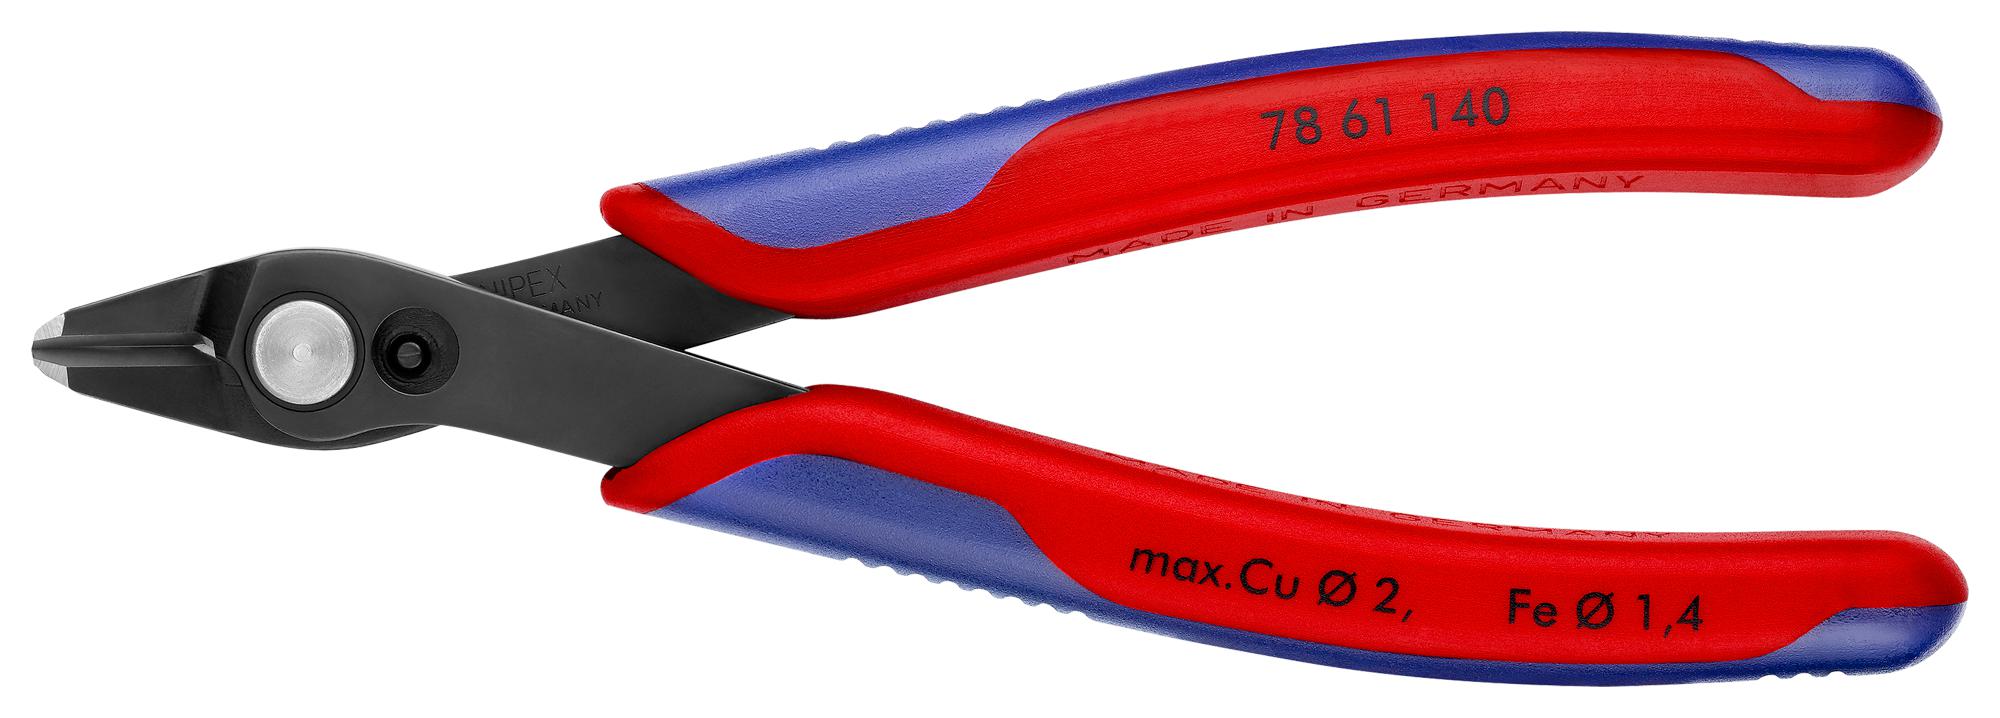 78 61 140 WIRE CUTTER, SHEAR, 2.1MM, 140MM KNIPEX